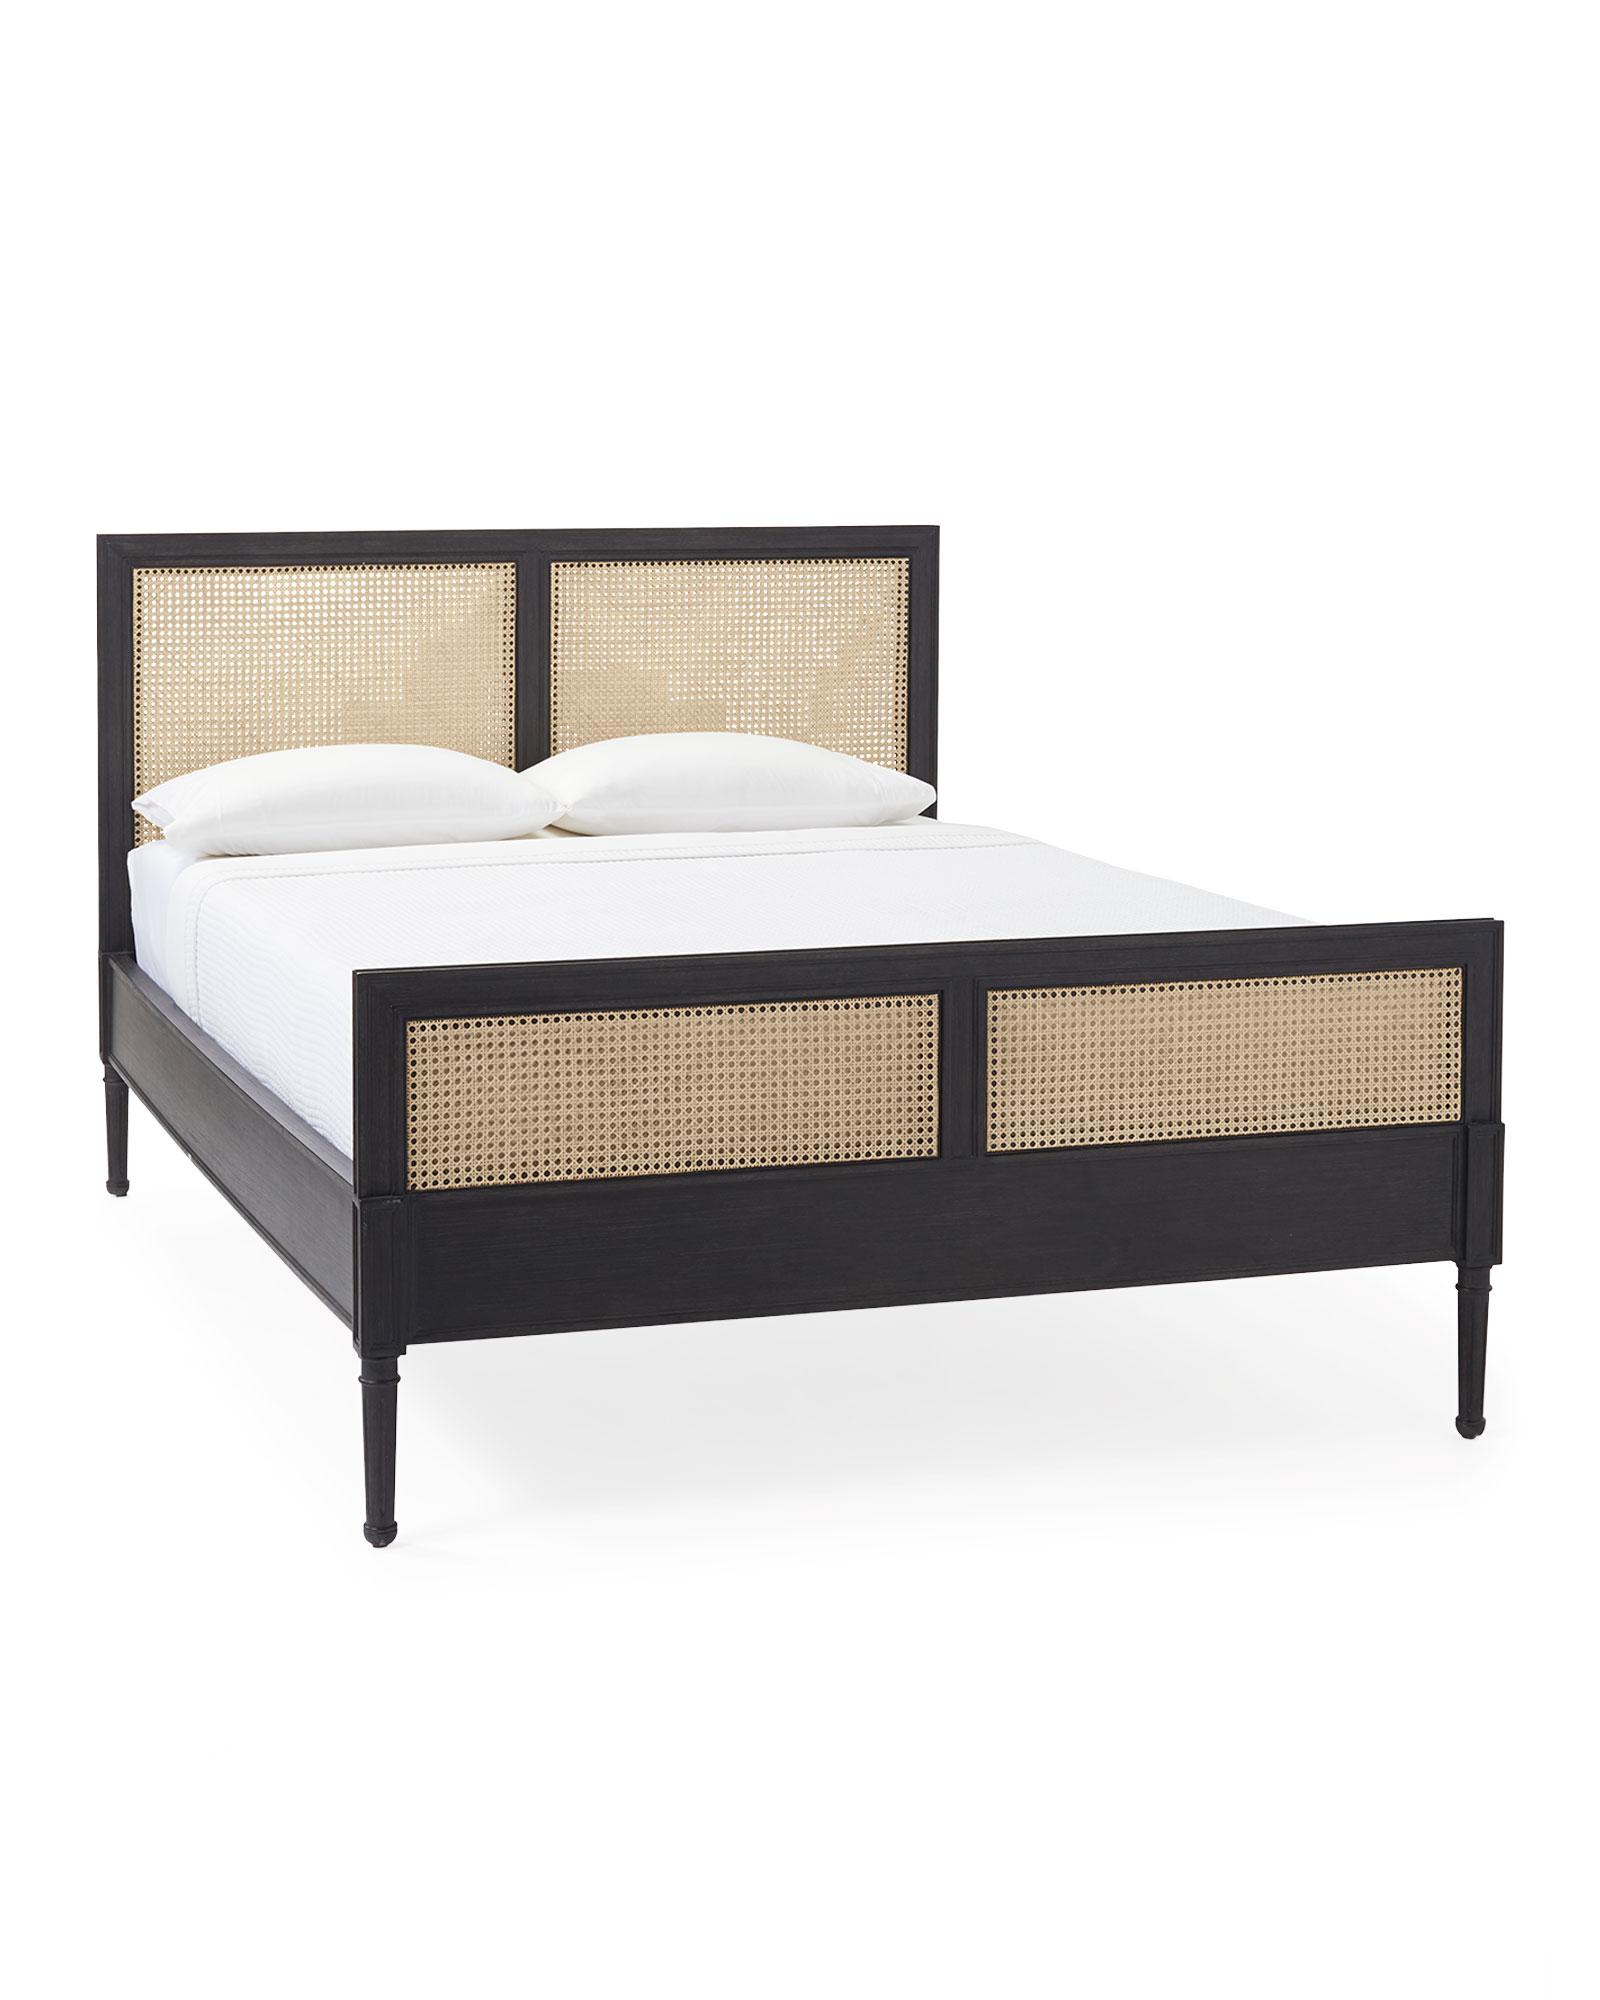 Harbour Cane Bed in Ebony Beige, Twin | Serena & Lily